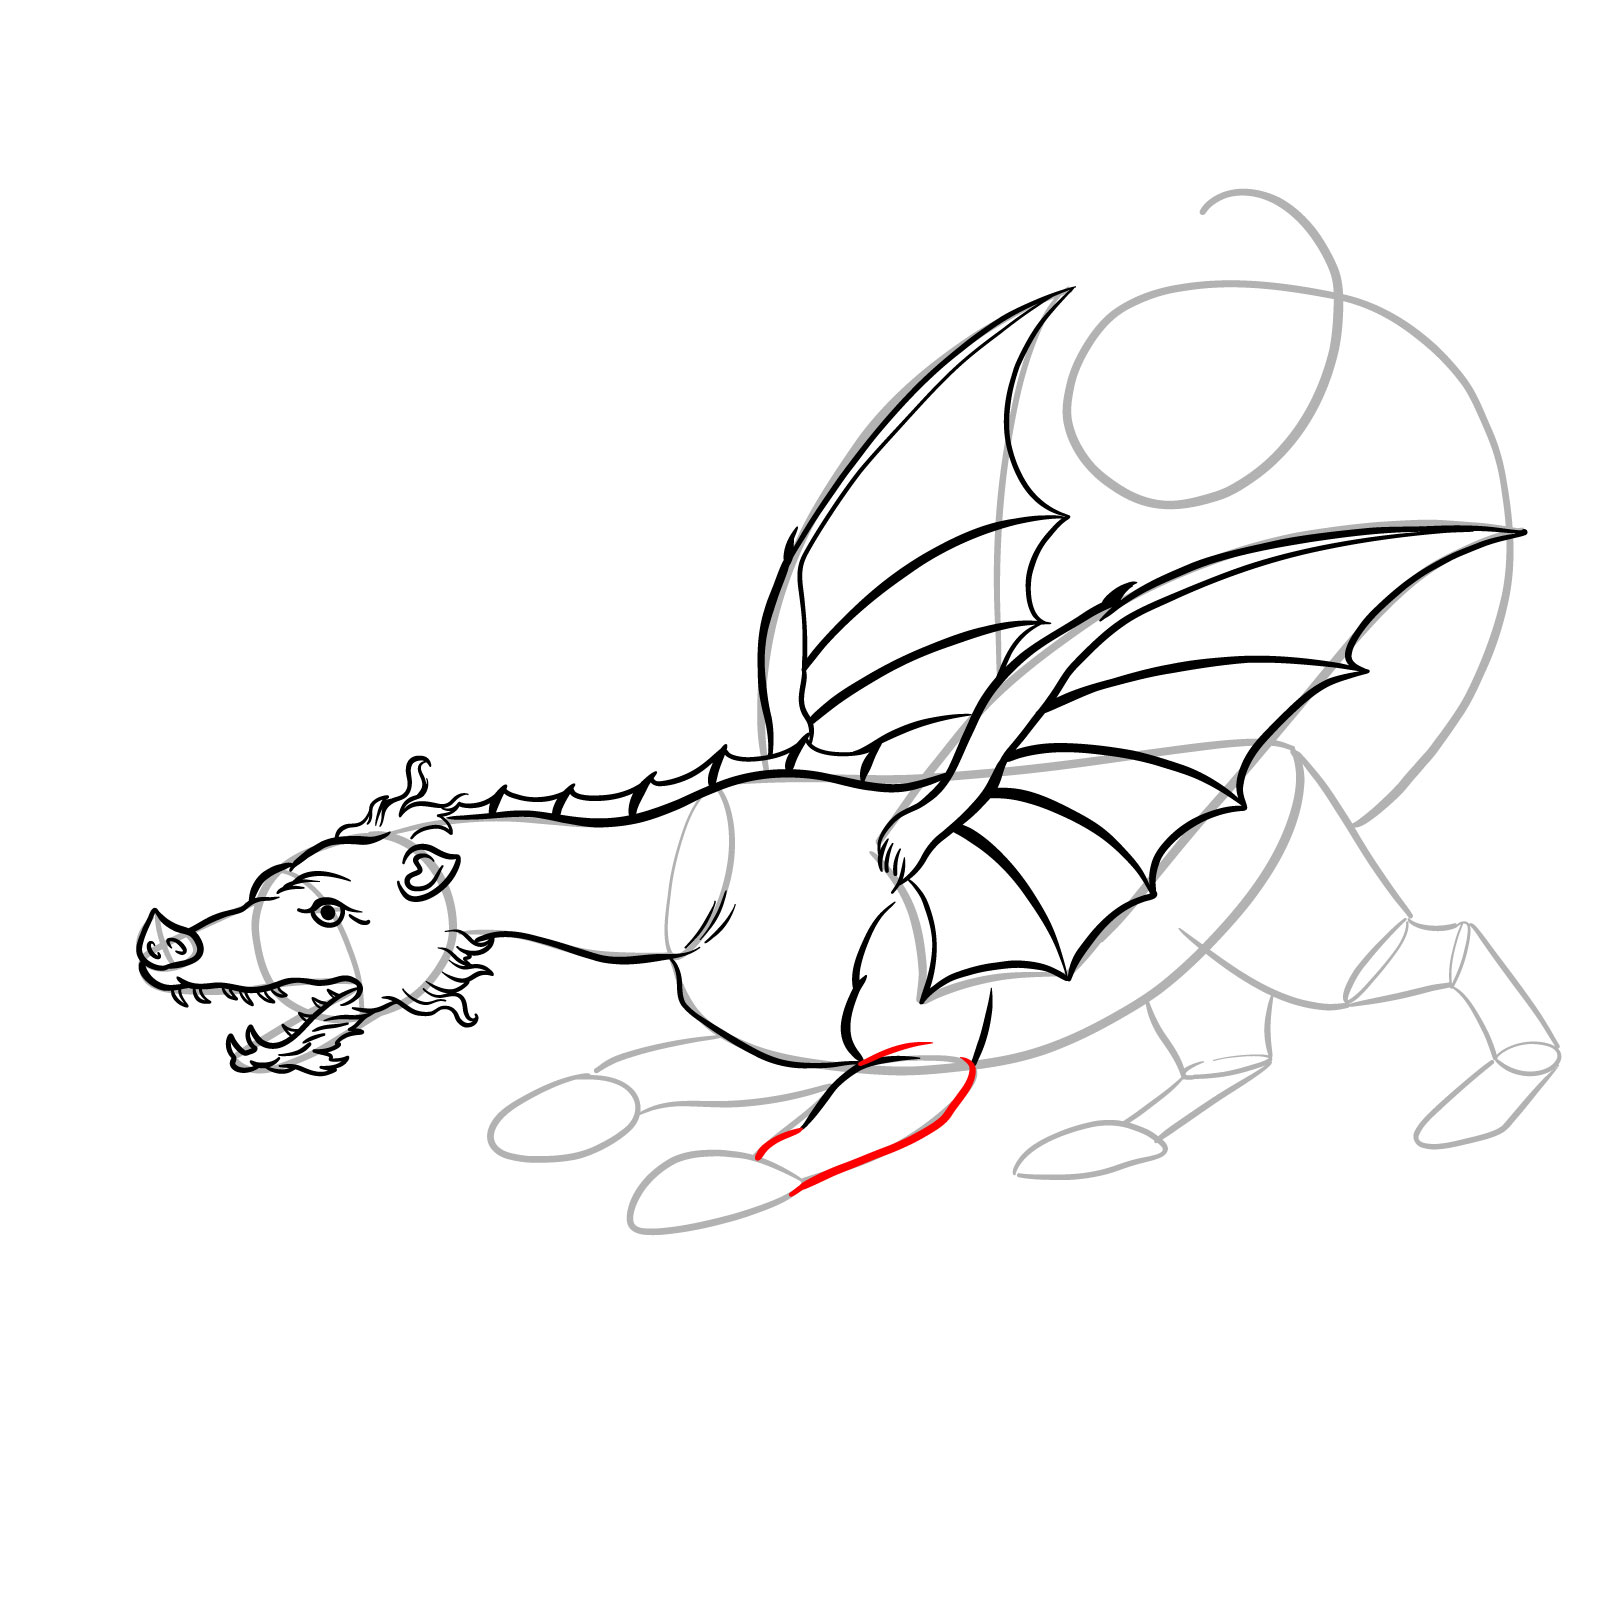 How to draw a classic European dragon - step 26